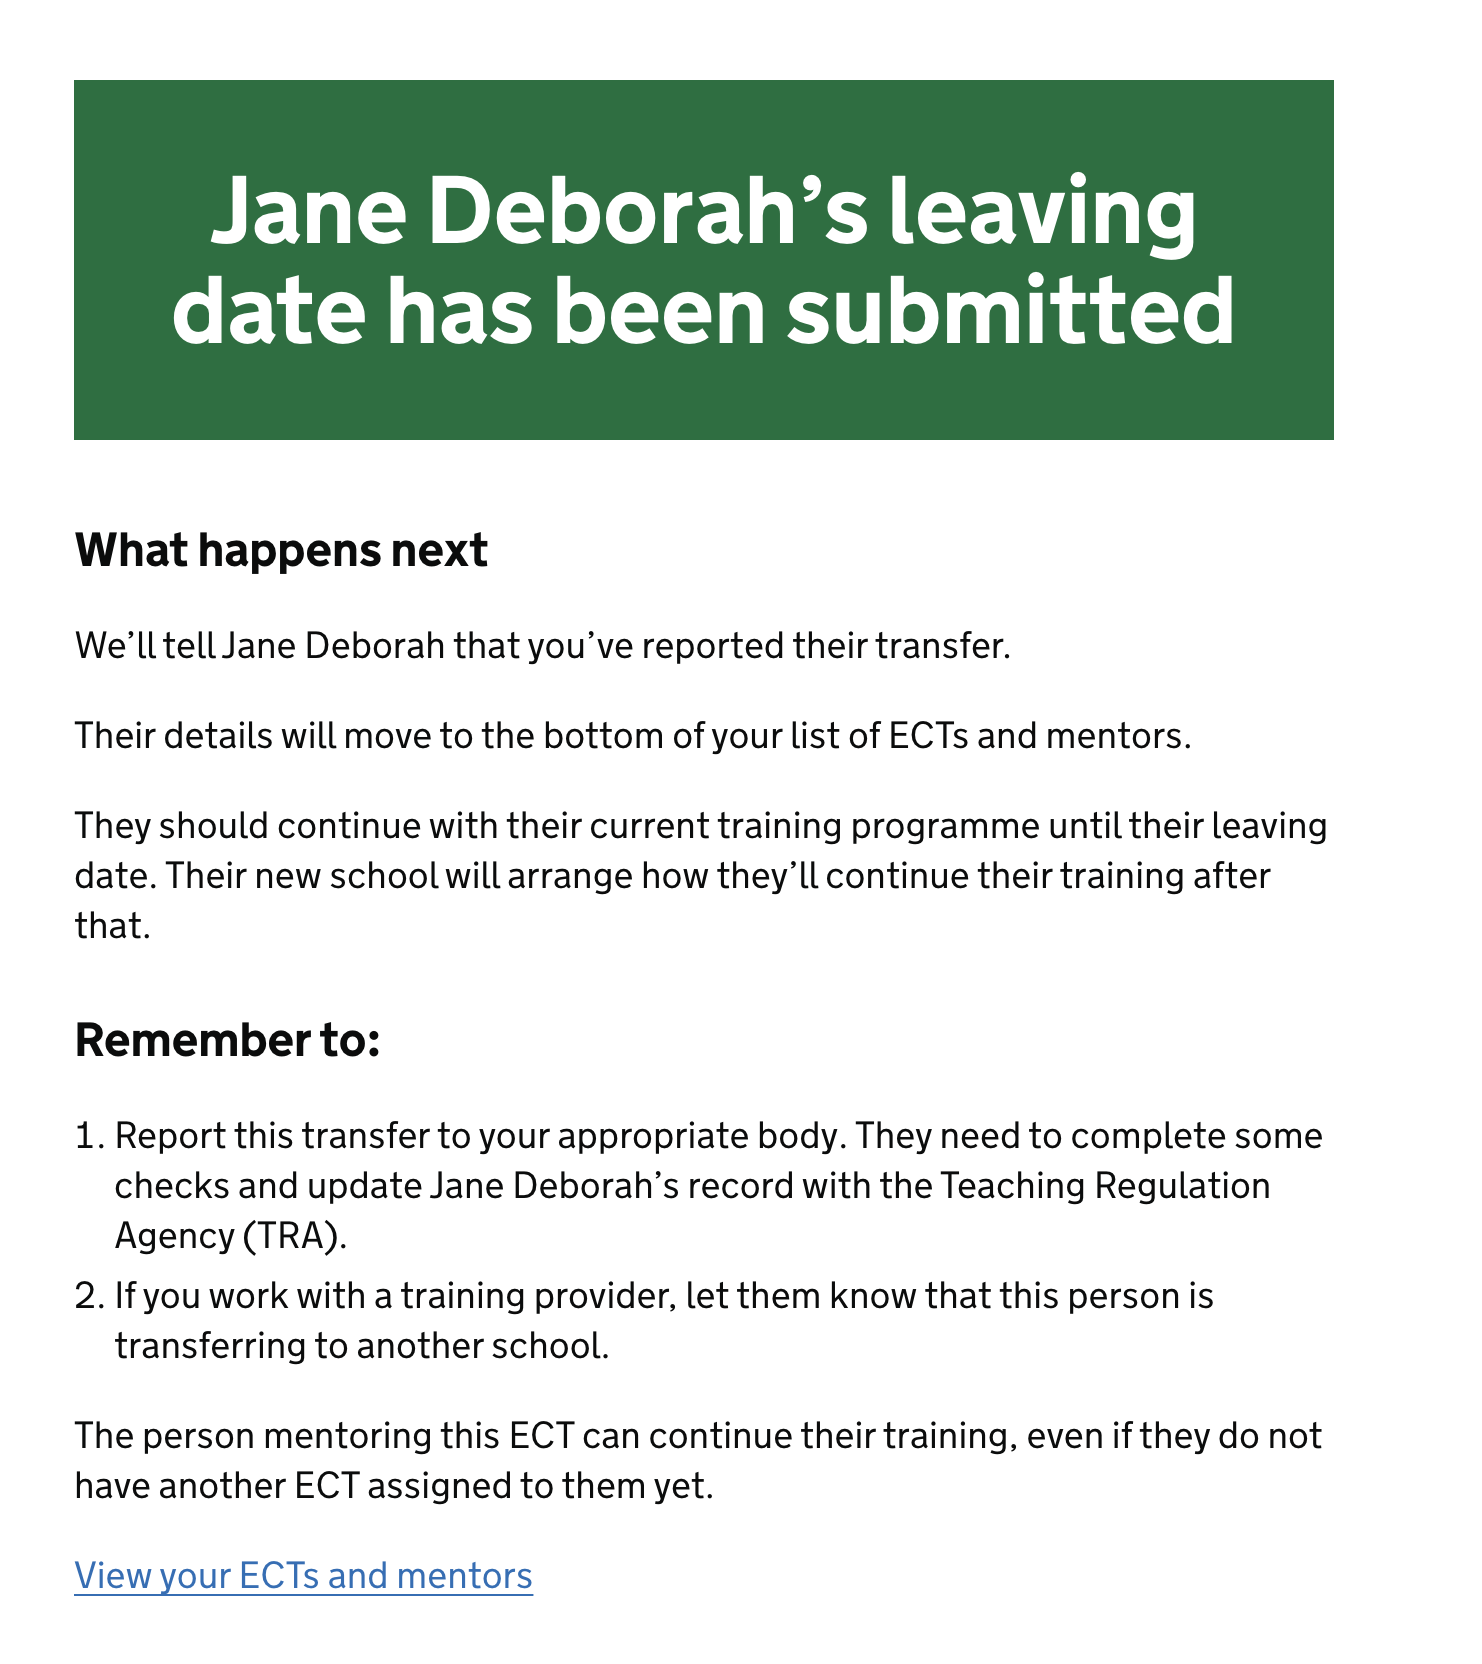 Screenshot with a heading saying ‘Jane Deborah's leaving date has been submitted’